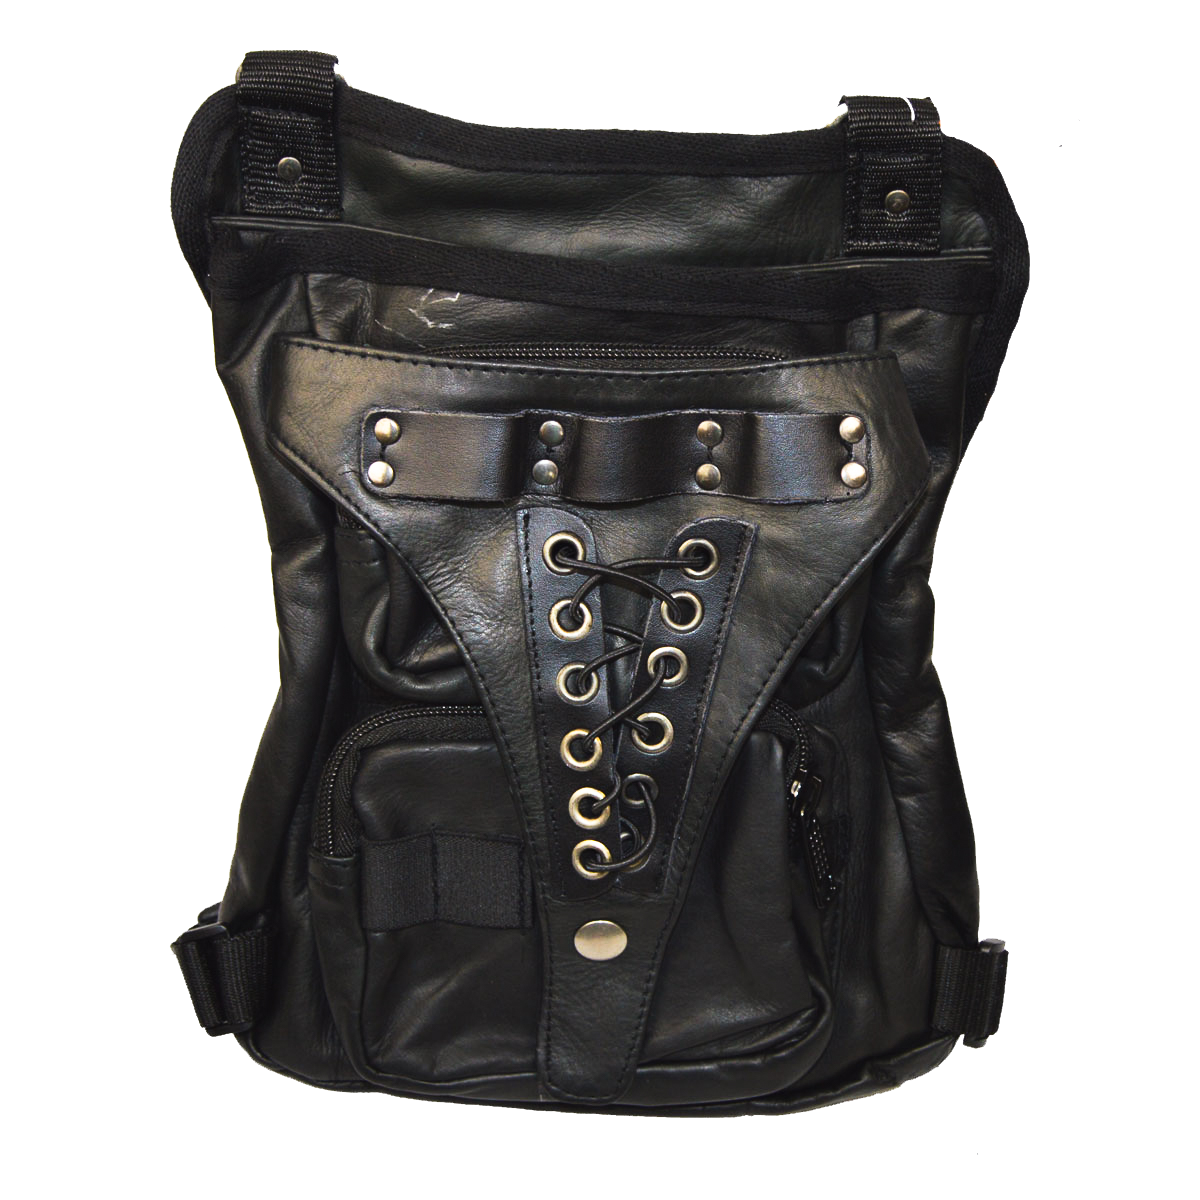 Vance Black Carry Leather Thigh Bag with Waist Belt